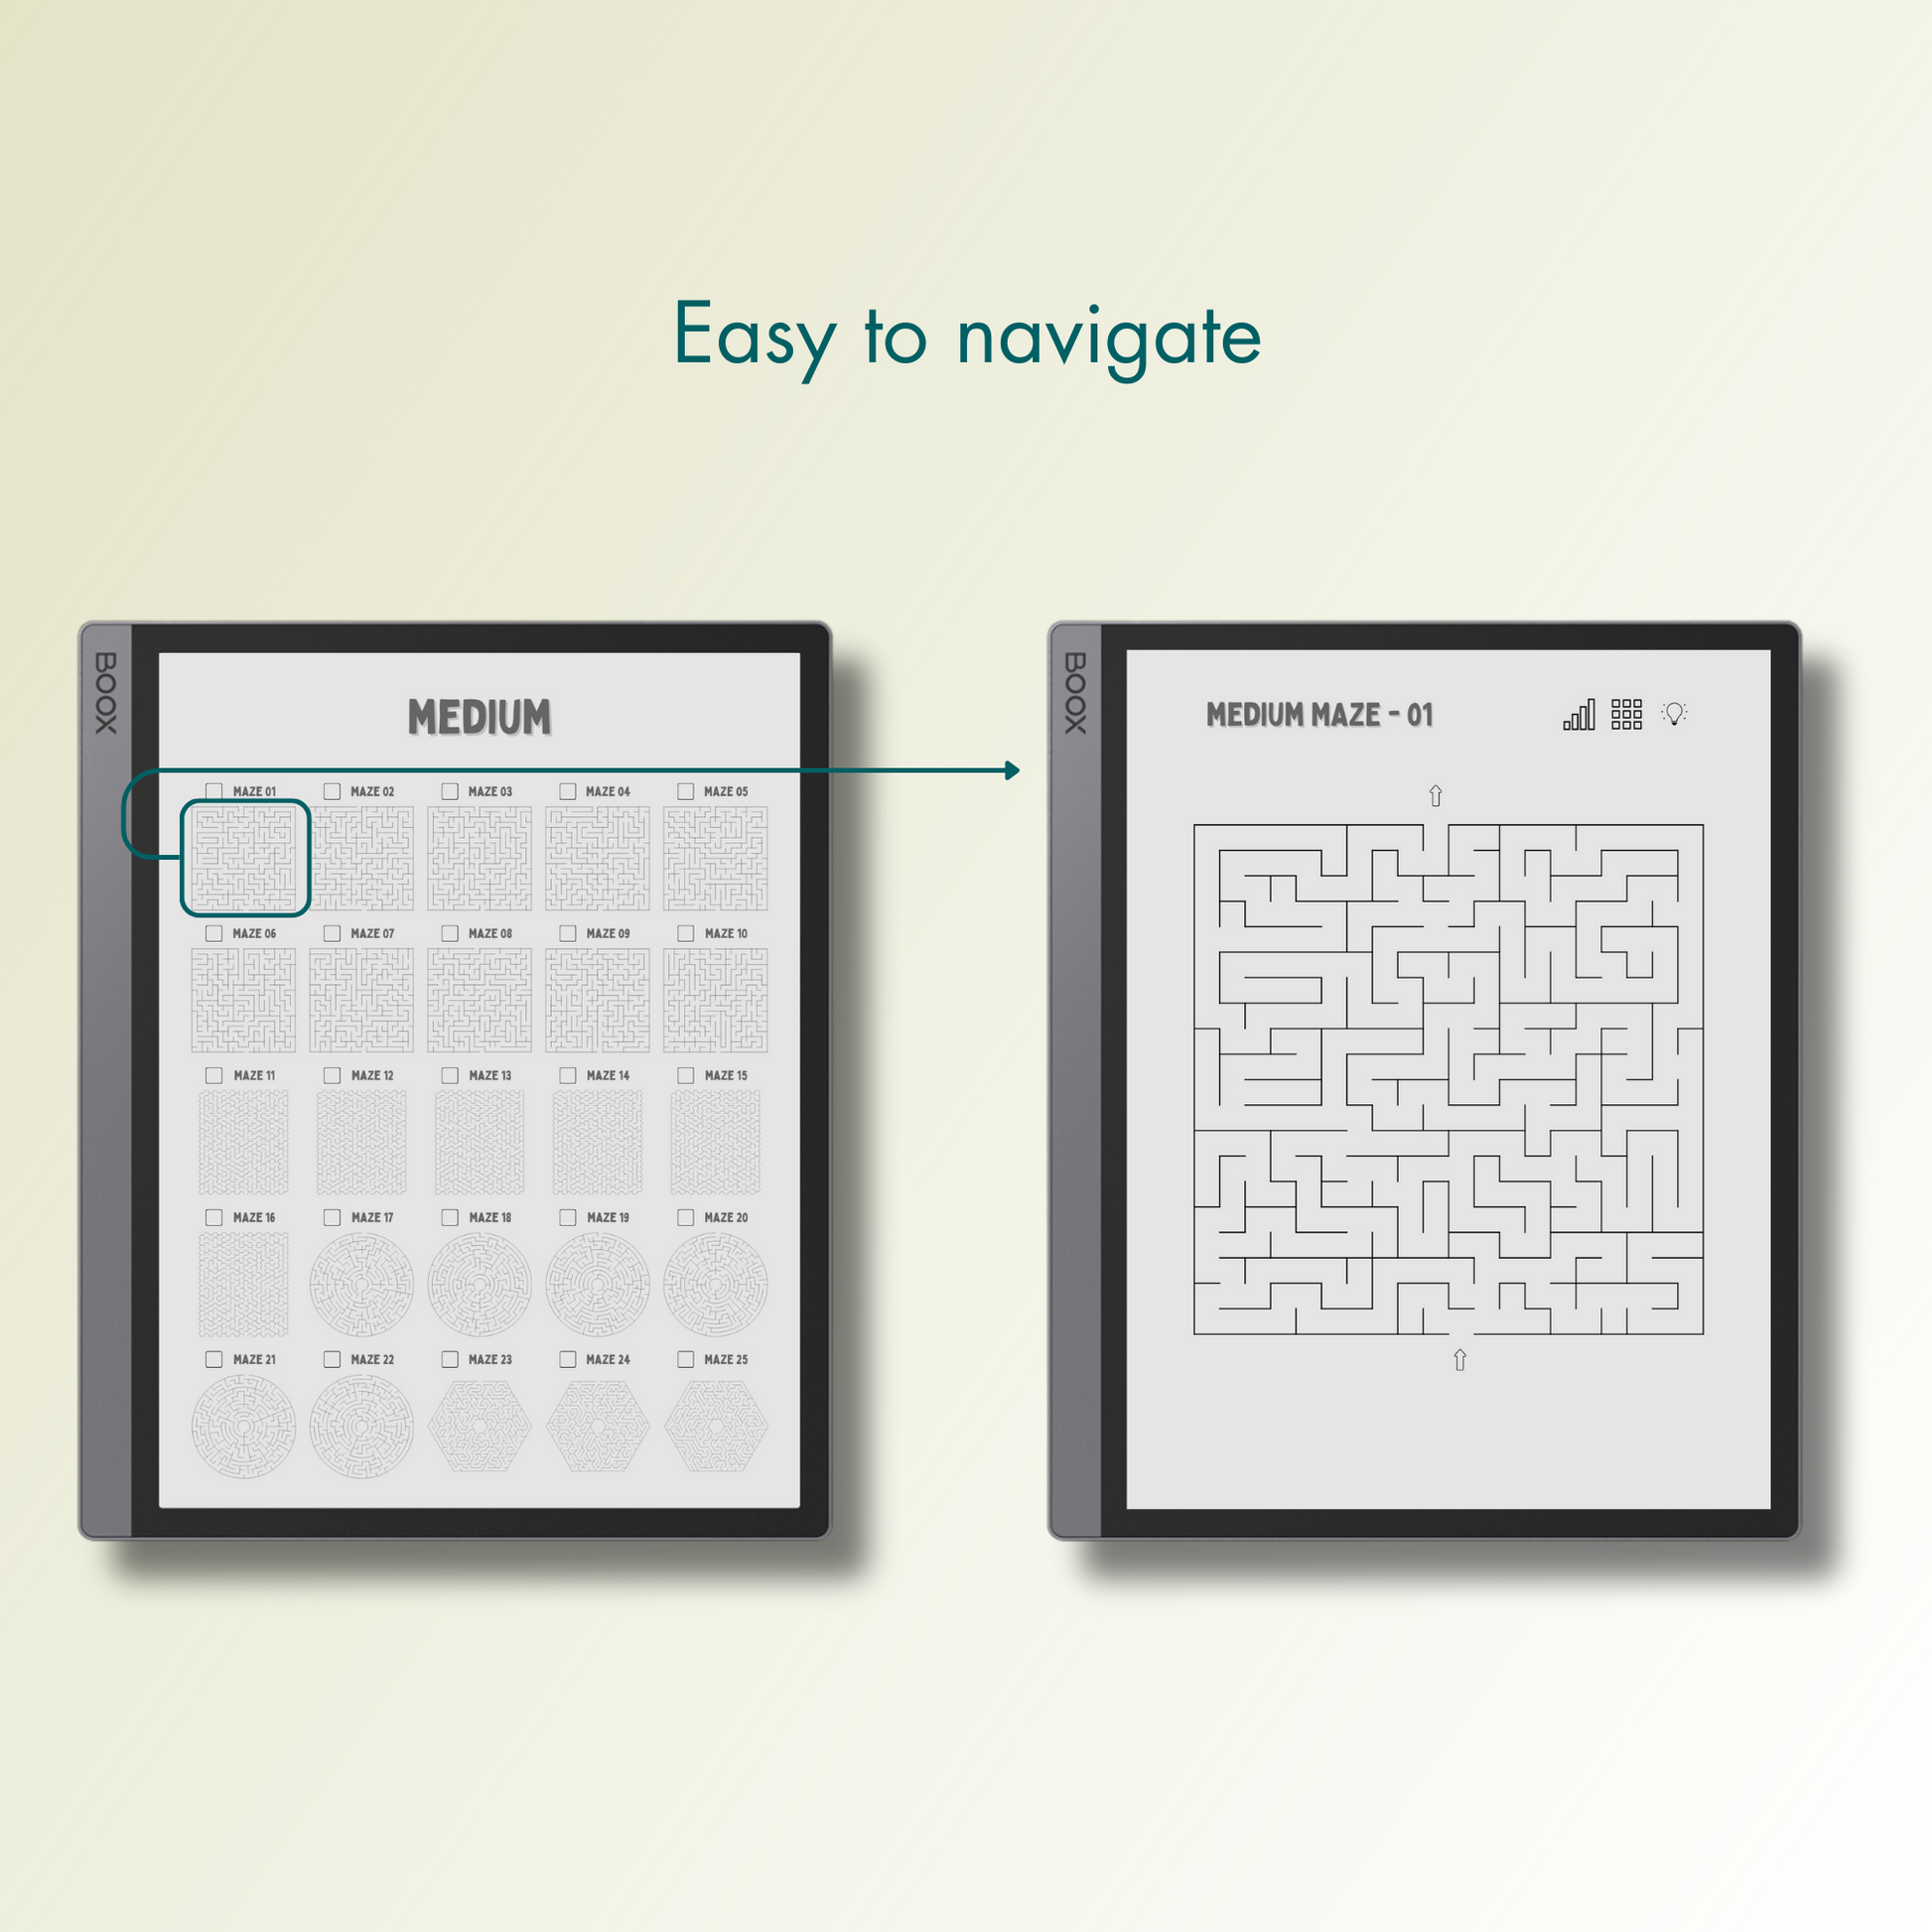 Onyx Boox Maze Puzzles with easy navigations.